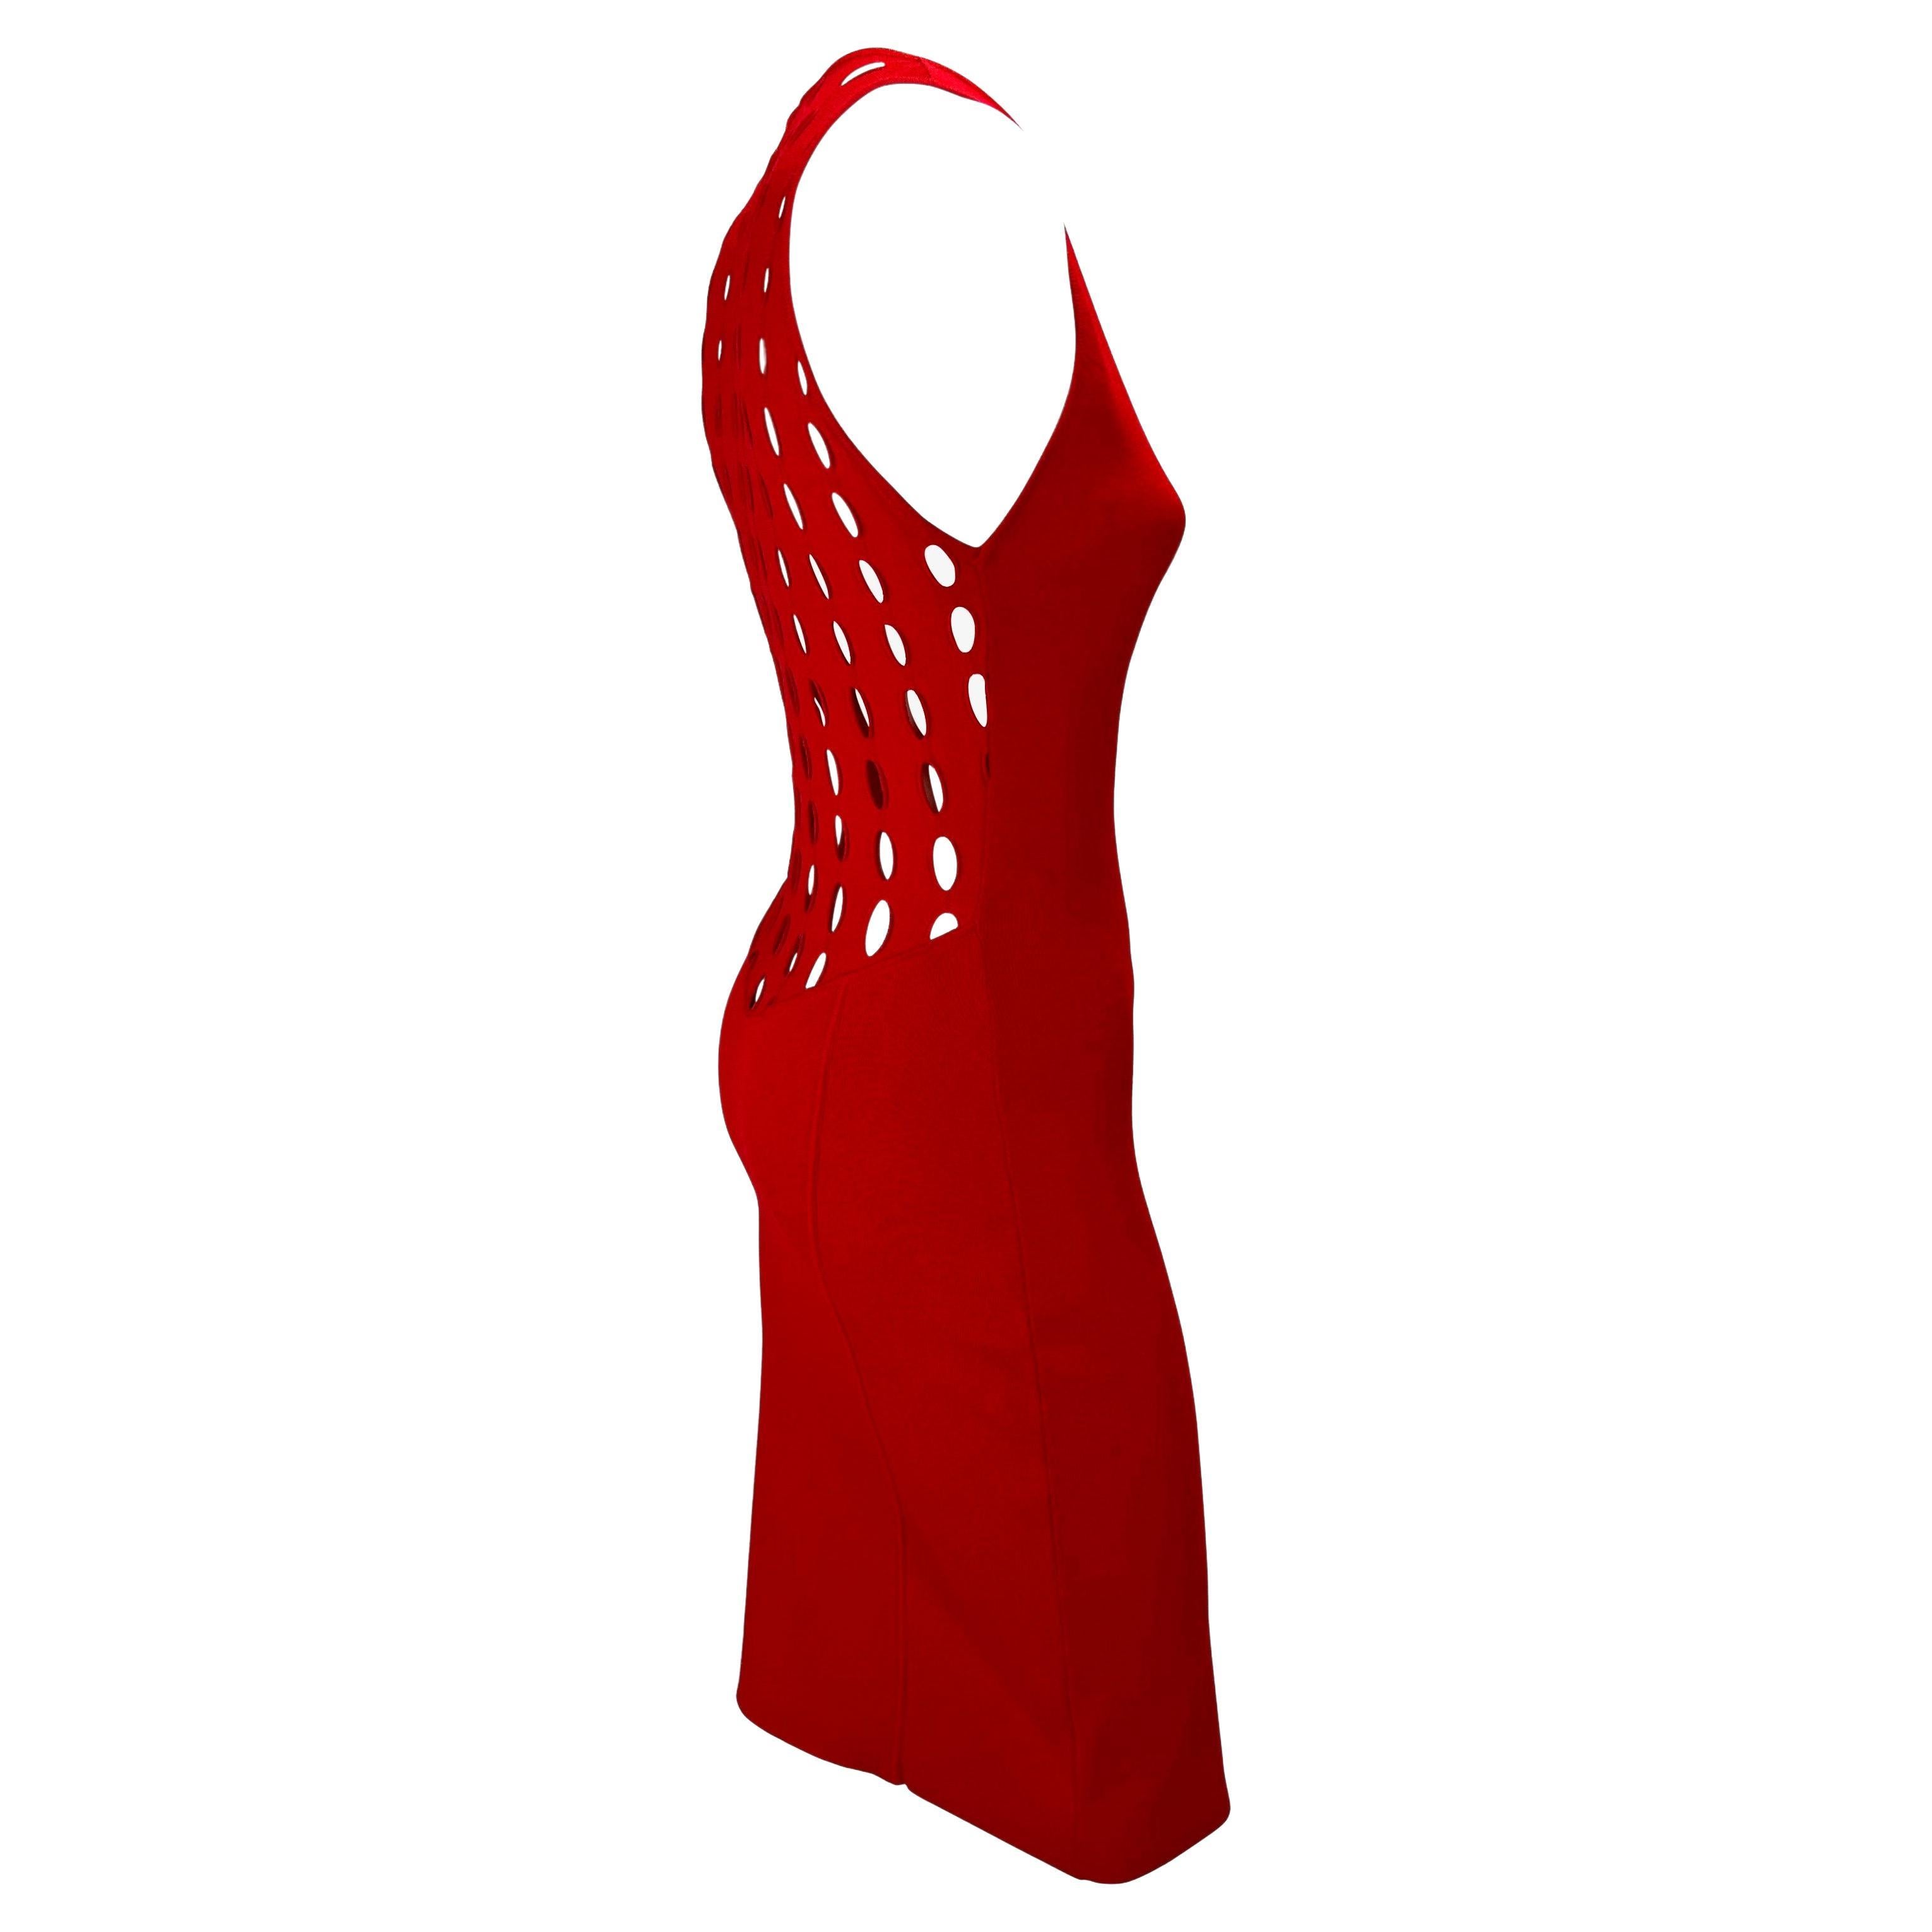 Presenting a bright red eyelet cut-out Gianni Versace Couture dress, designed by Donatella Versace. From the Spring/Summer 2002 collection, this vibrant sleeveless dress features a wide crew neckline and eyelet cutouts at the back. This form-fitting